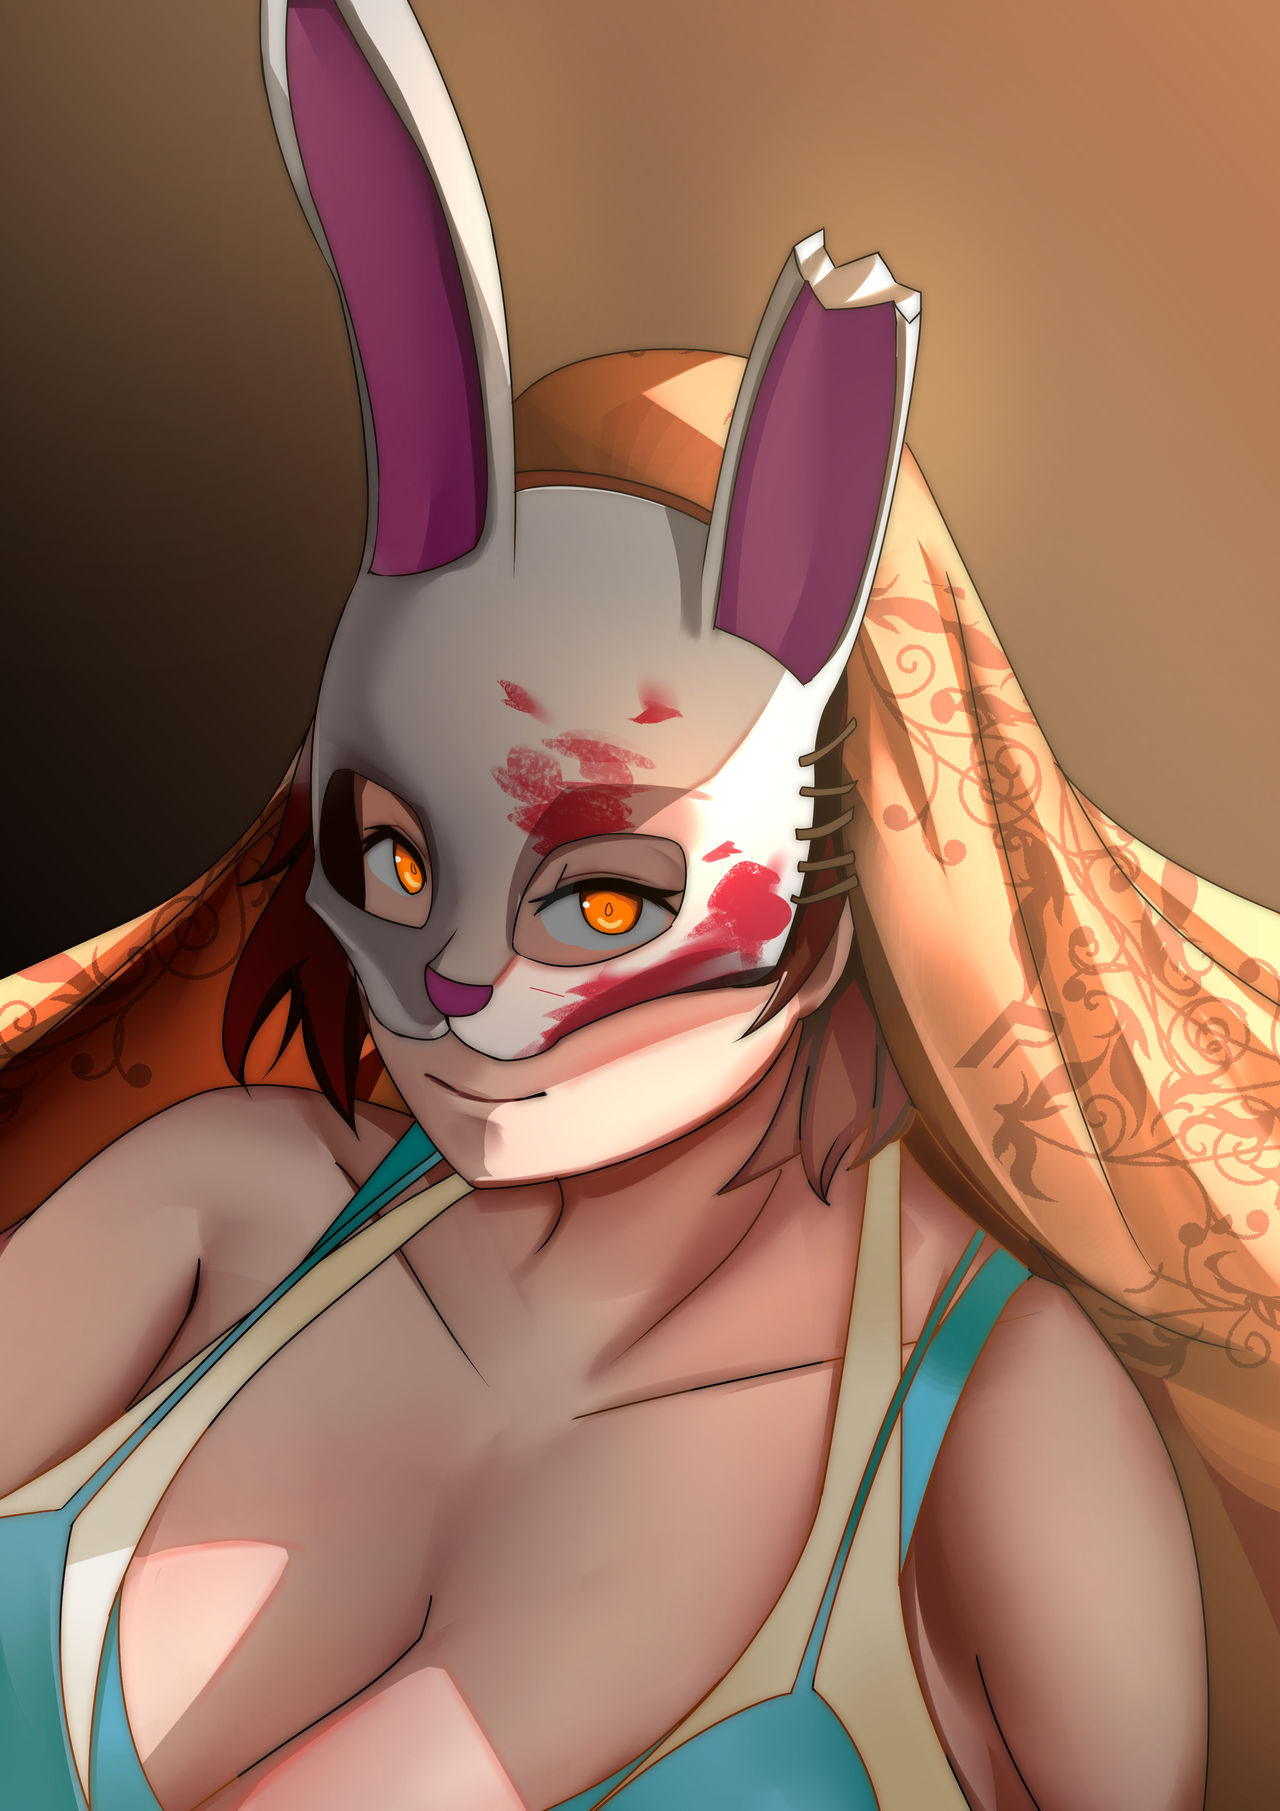 Dead by Daylight - Hooked on You - The Huntress by Brell on DeviantArt